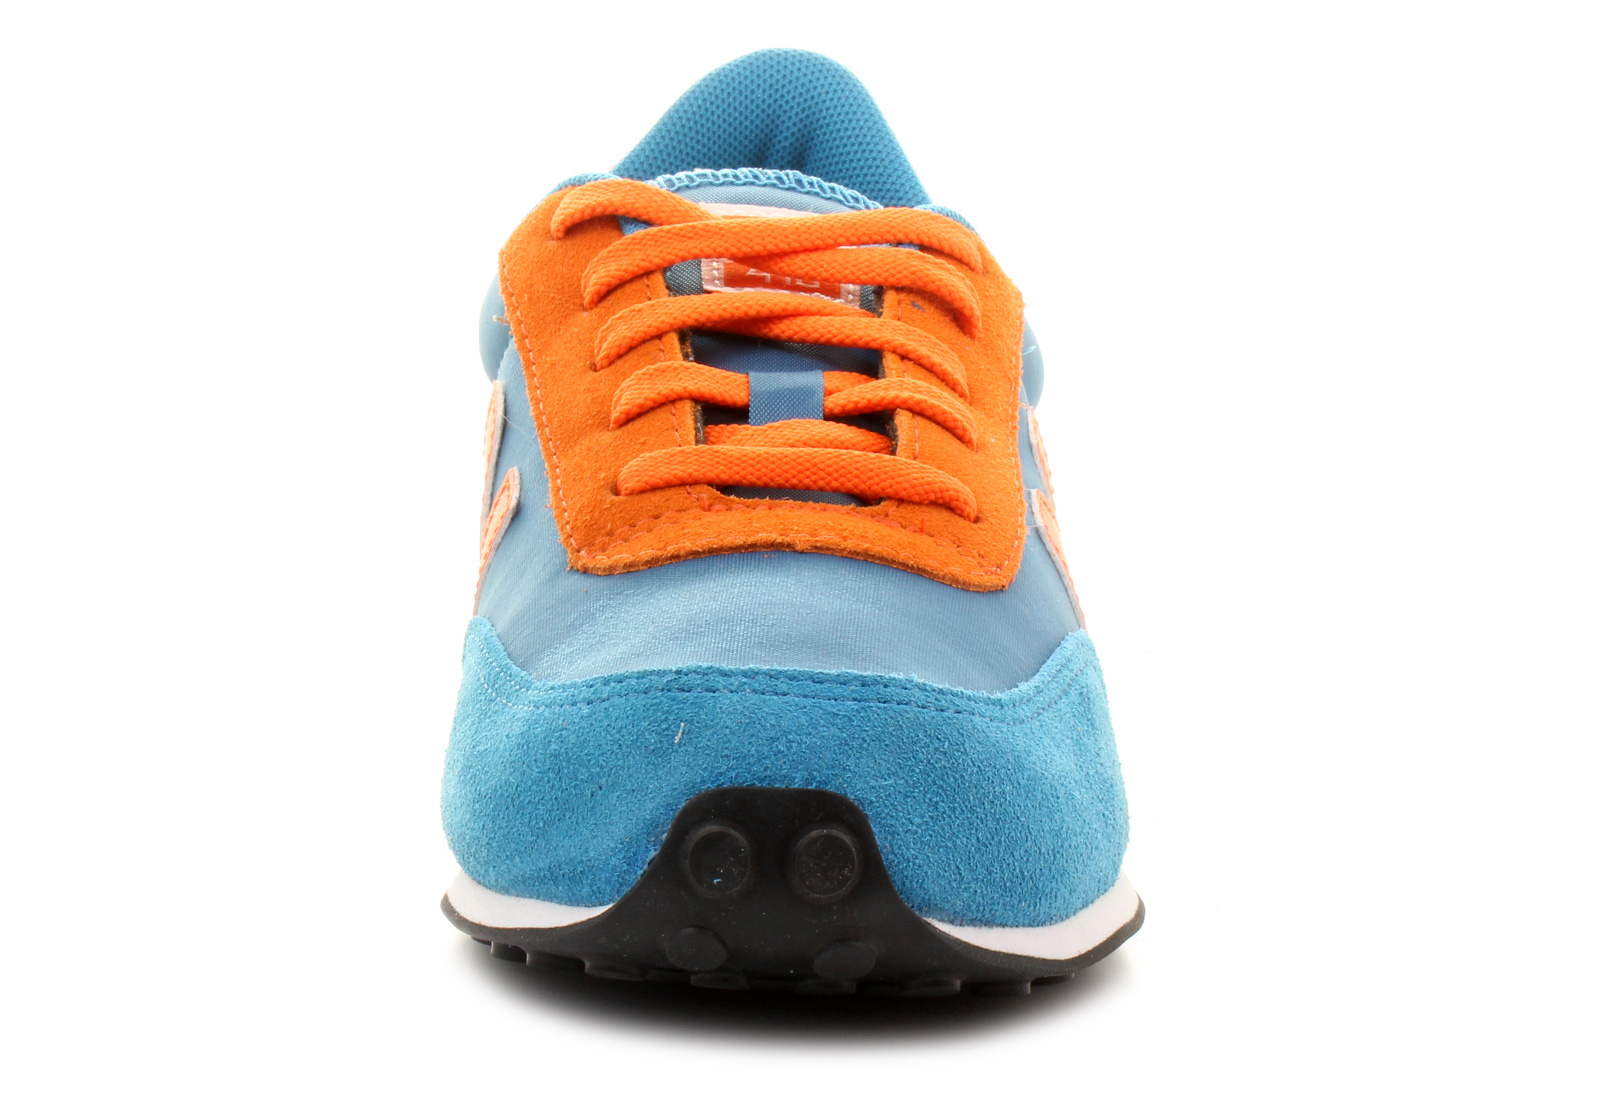 New Balance Sneaker - Kl410 - KL410AOY - Office Shoes